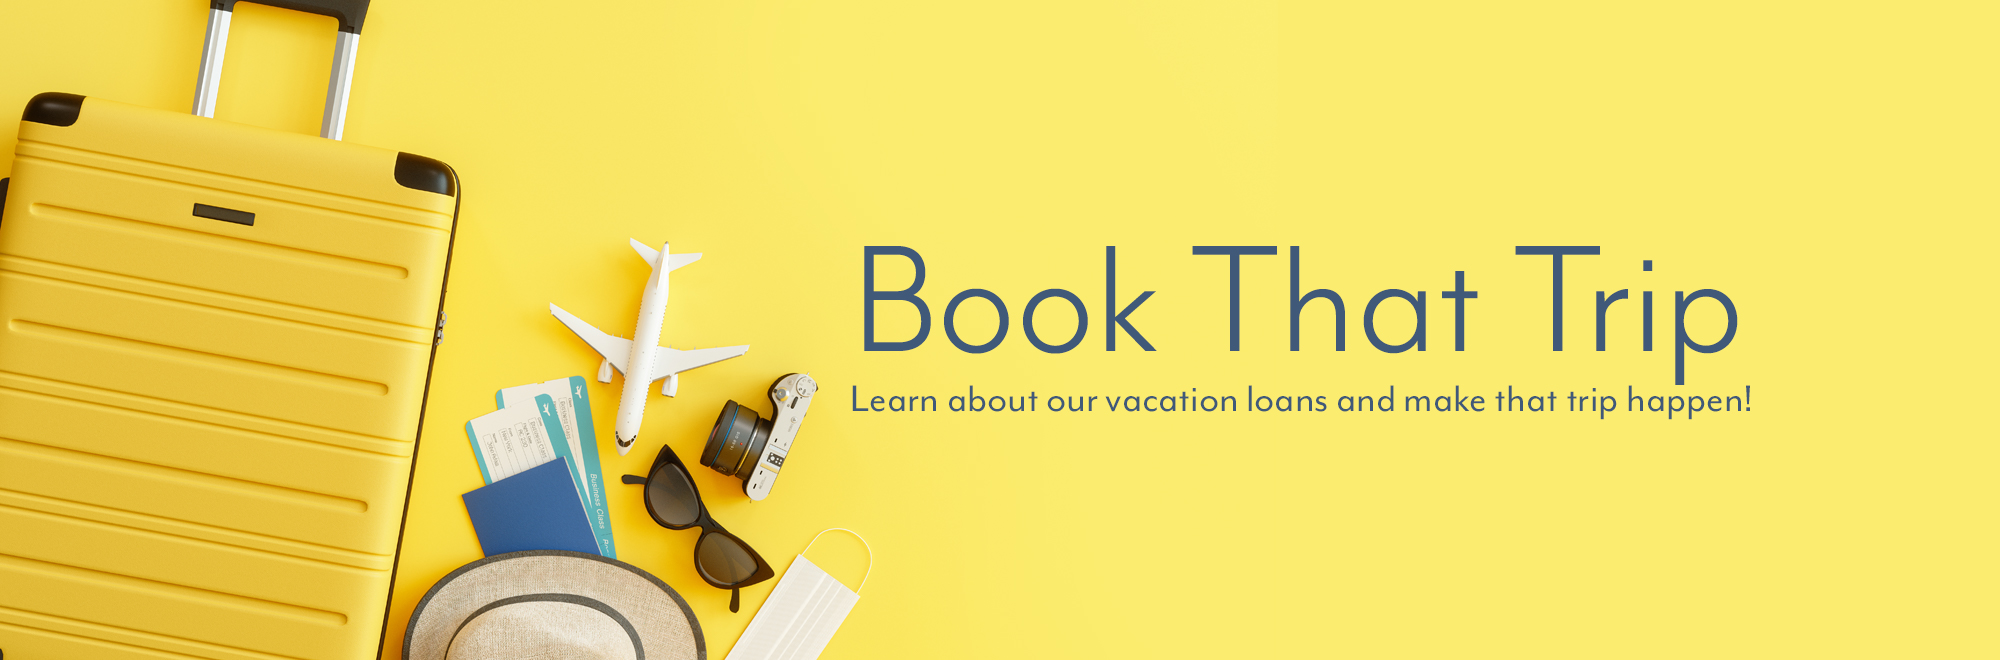 Book That Trip. Learn about our vacation loans and make that trip happen!